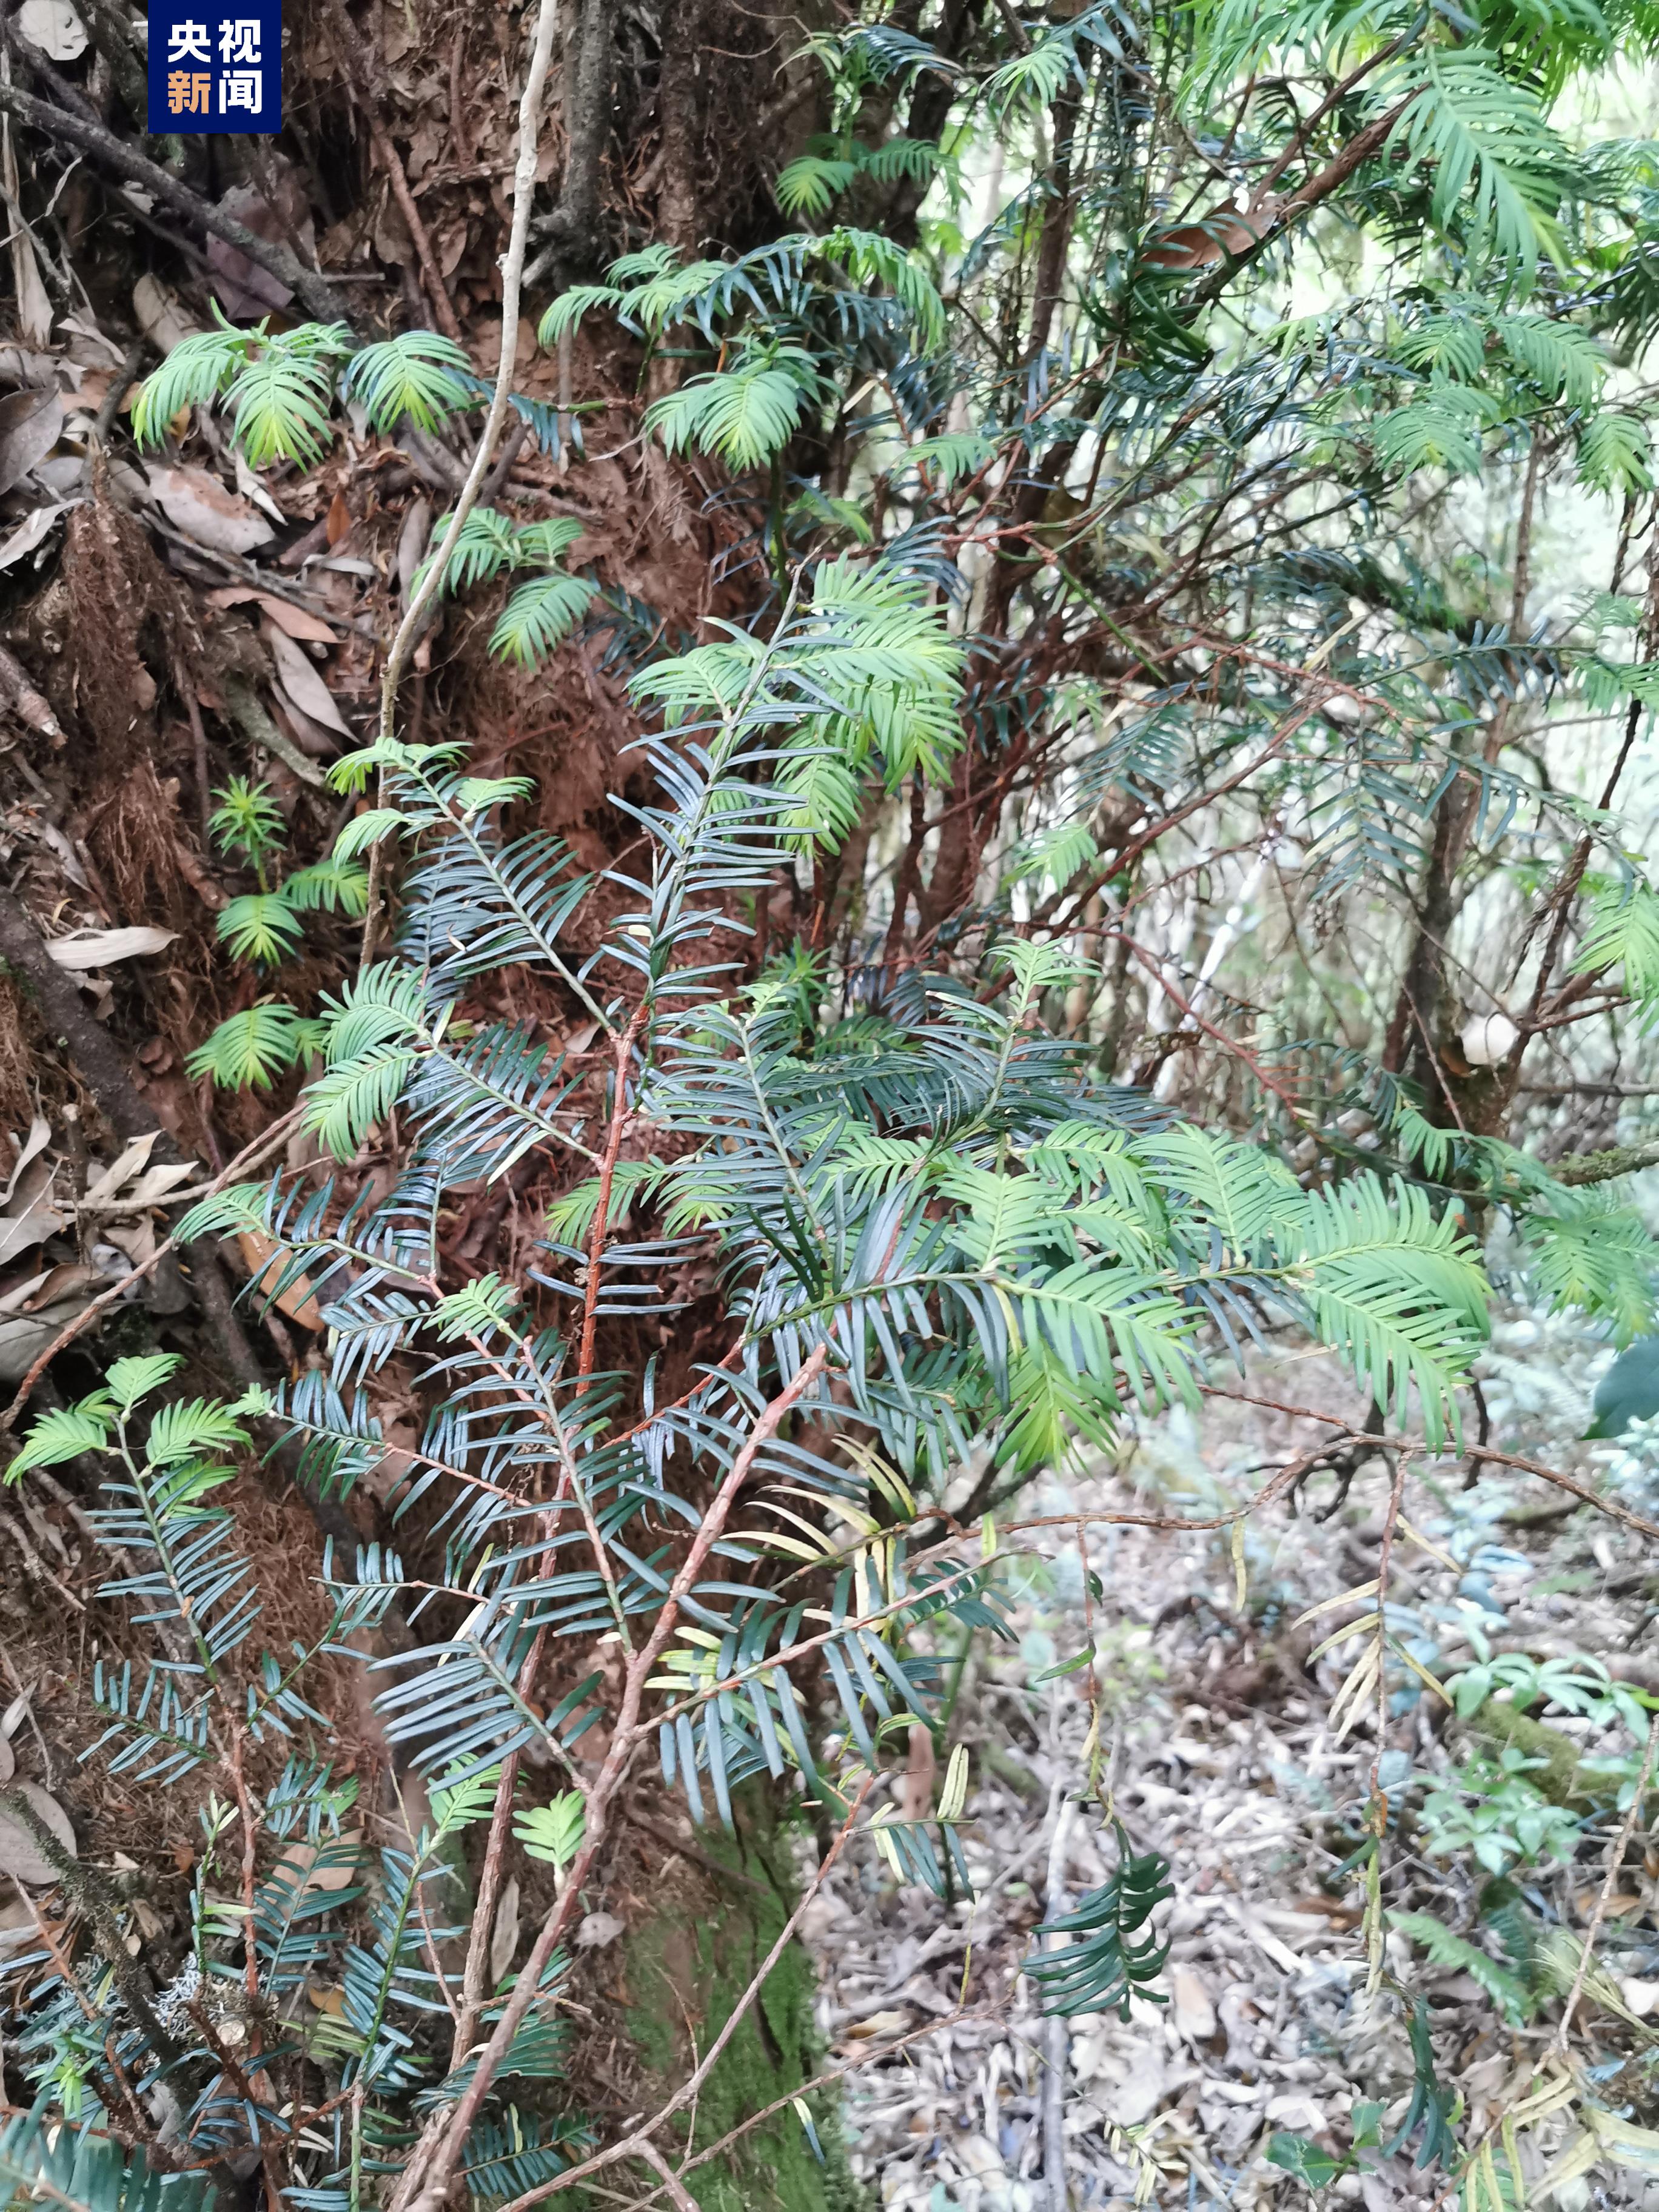 Closeup of the Himalayan yew's leaves and branches. /CMG